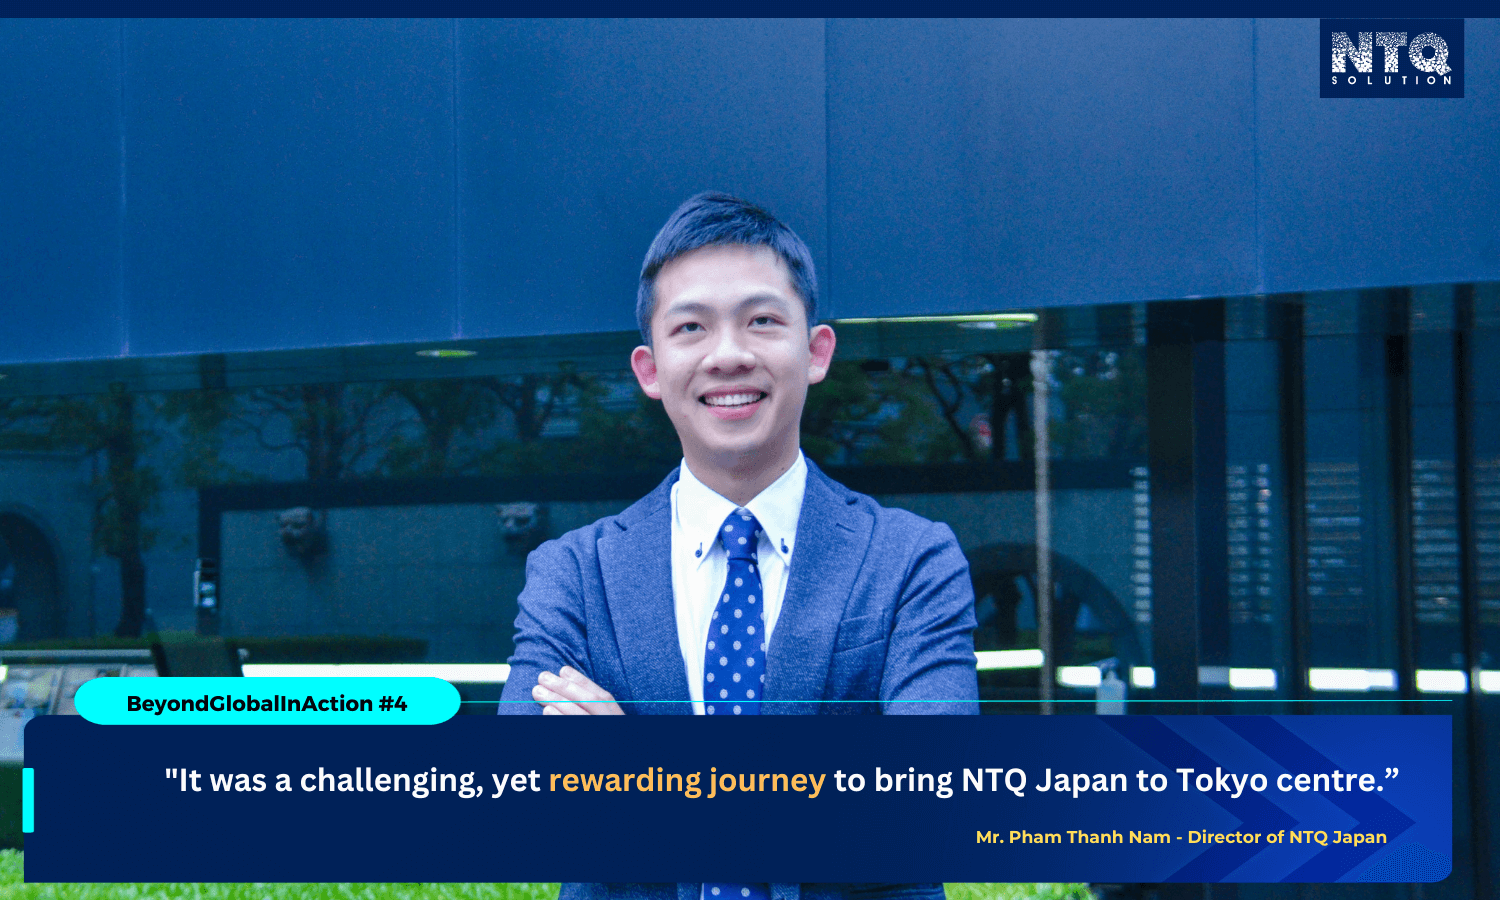 Beyond Global In Action #4: “It was a challenging, yet rewarding journey to bring NTQ Japan to Tokyo centre.”